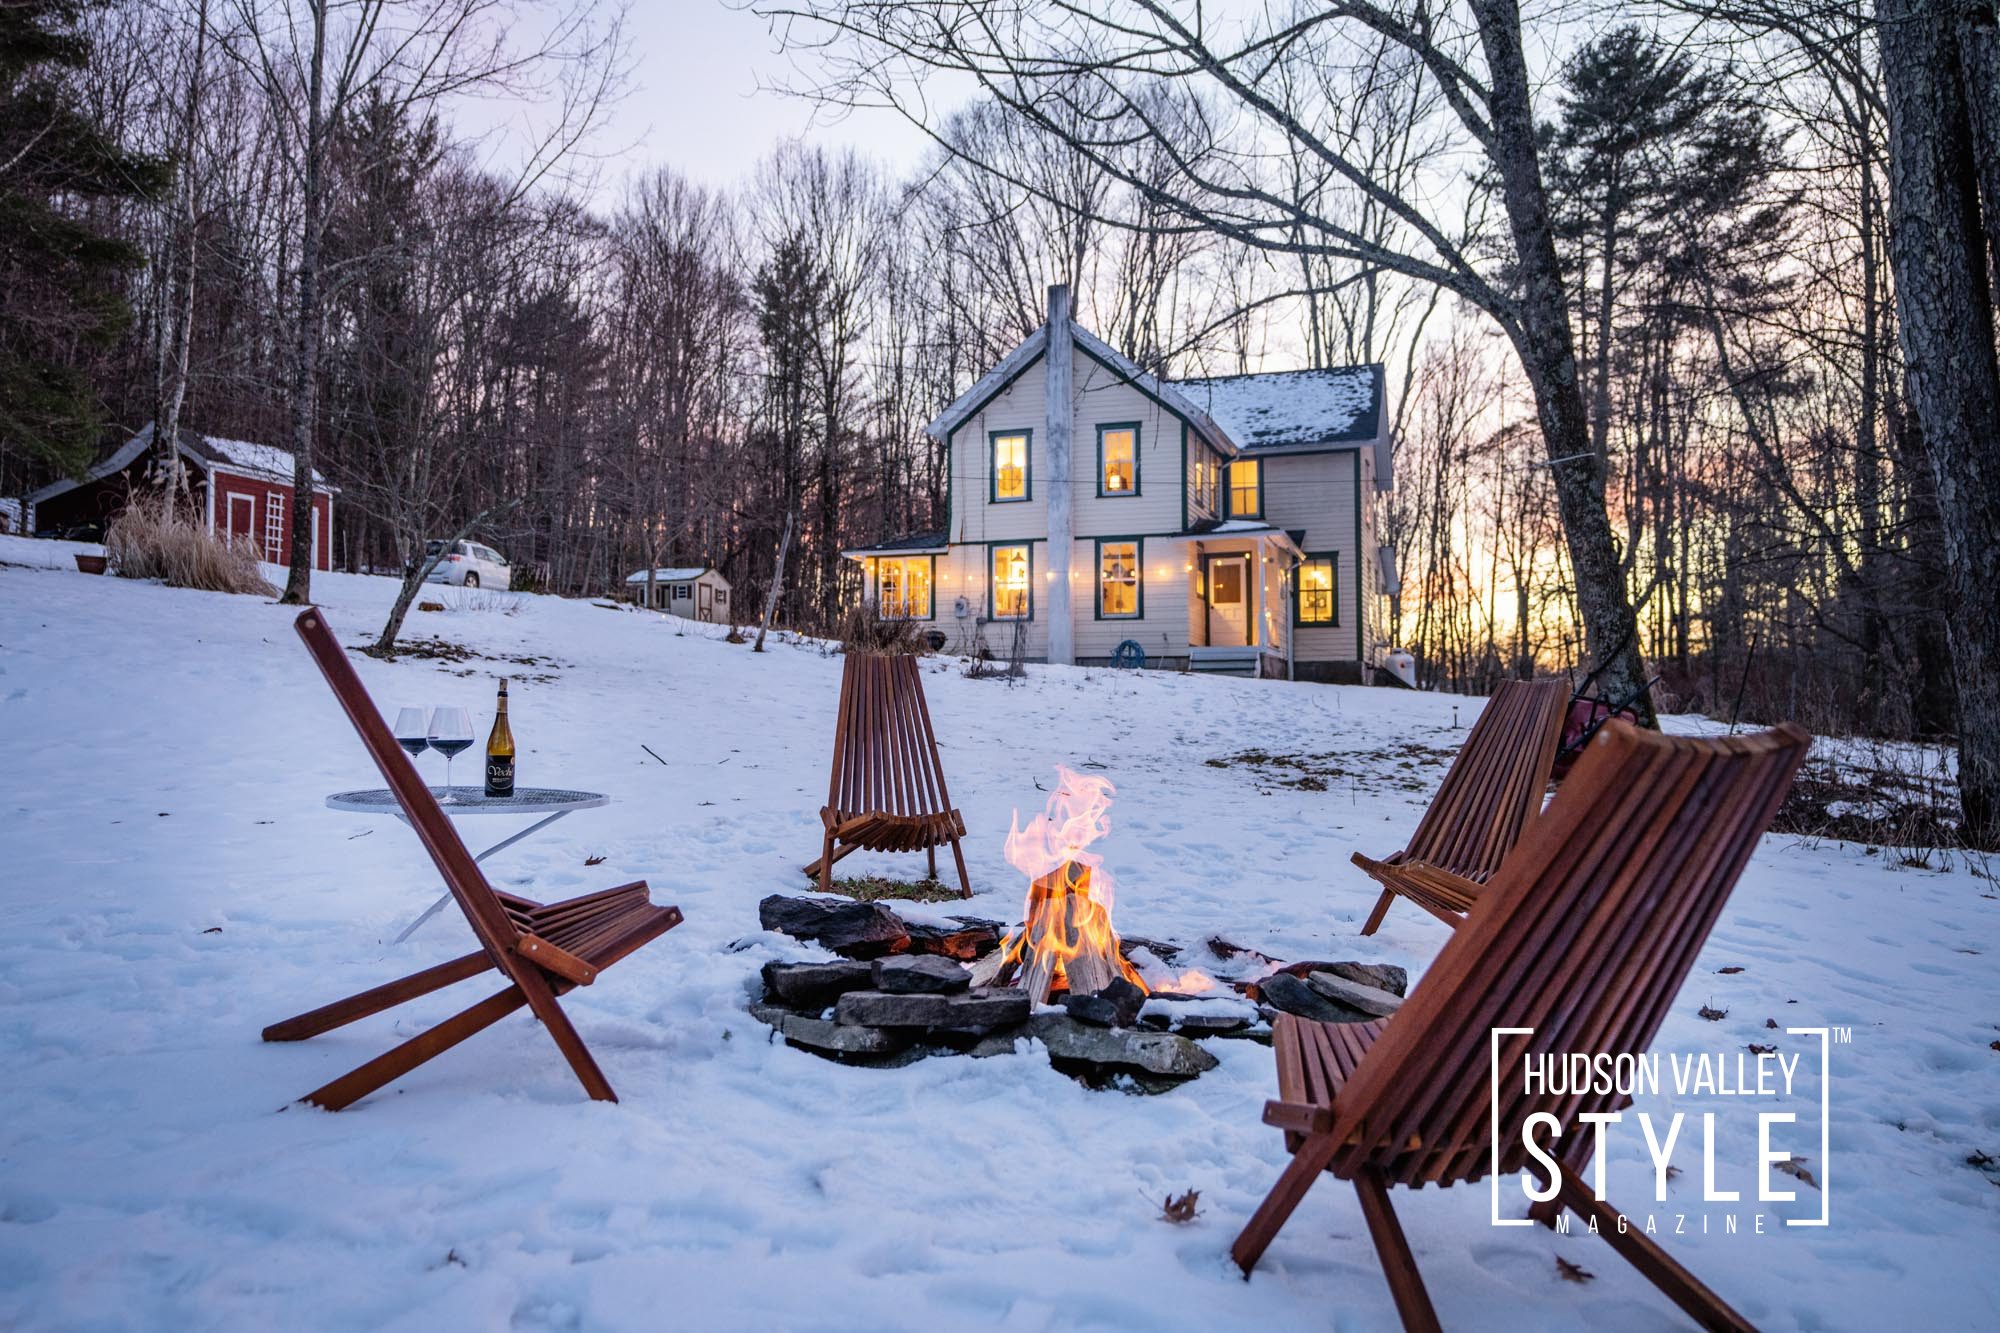 Escape to Nature at this LGBTQ-Friendly Travel Destination: Authentic Hudson Valley Style Farmhouse in the Catskill Mountains – Presented by Alluvion Vacations